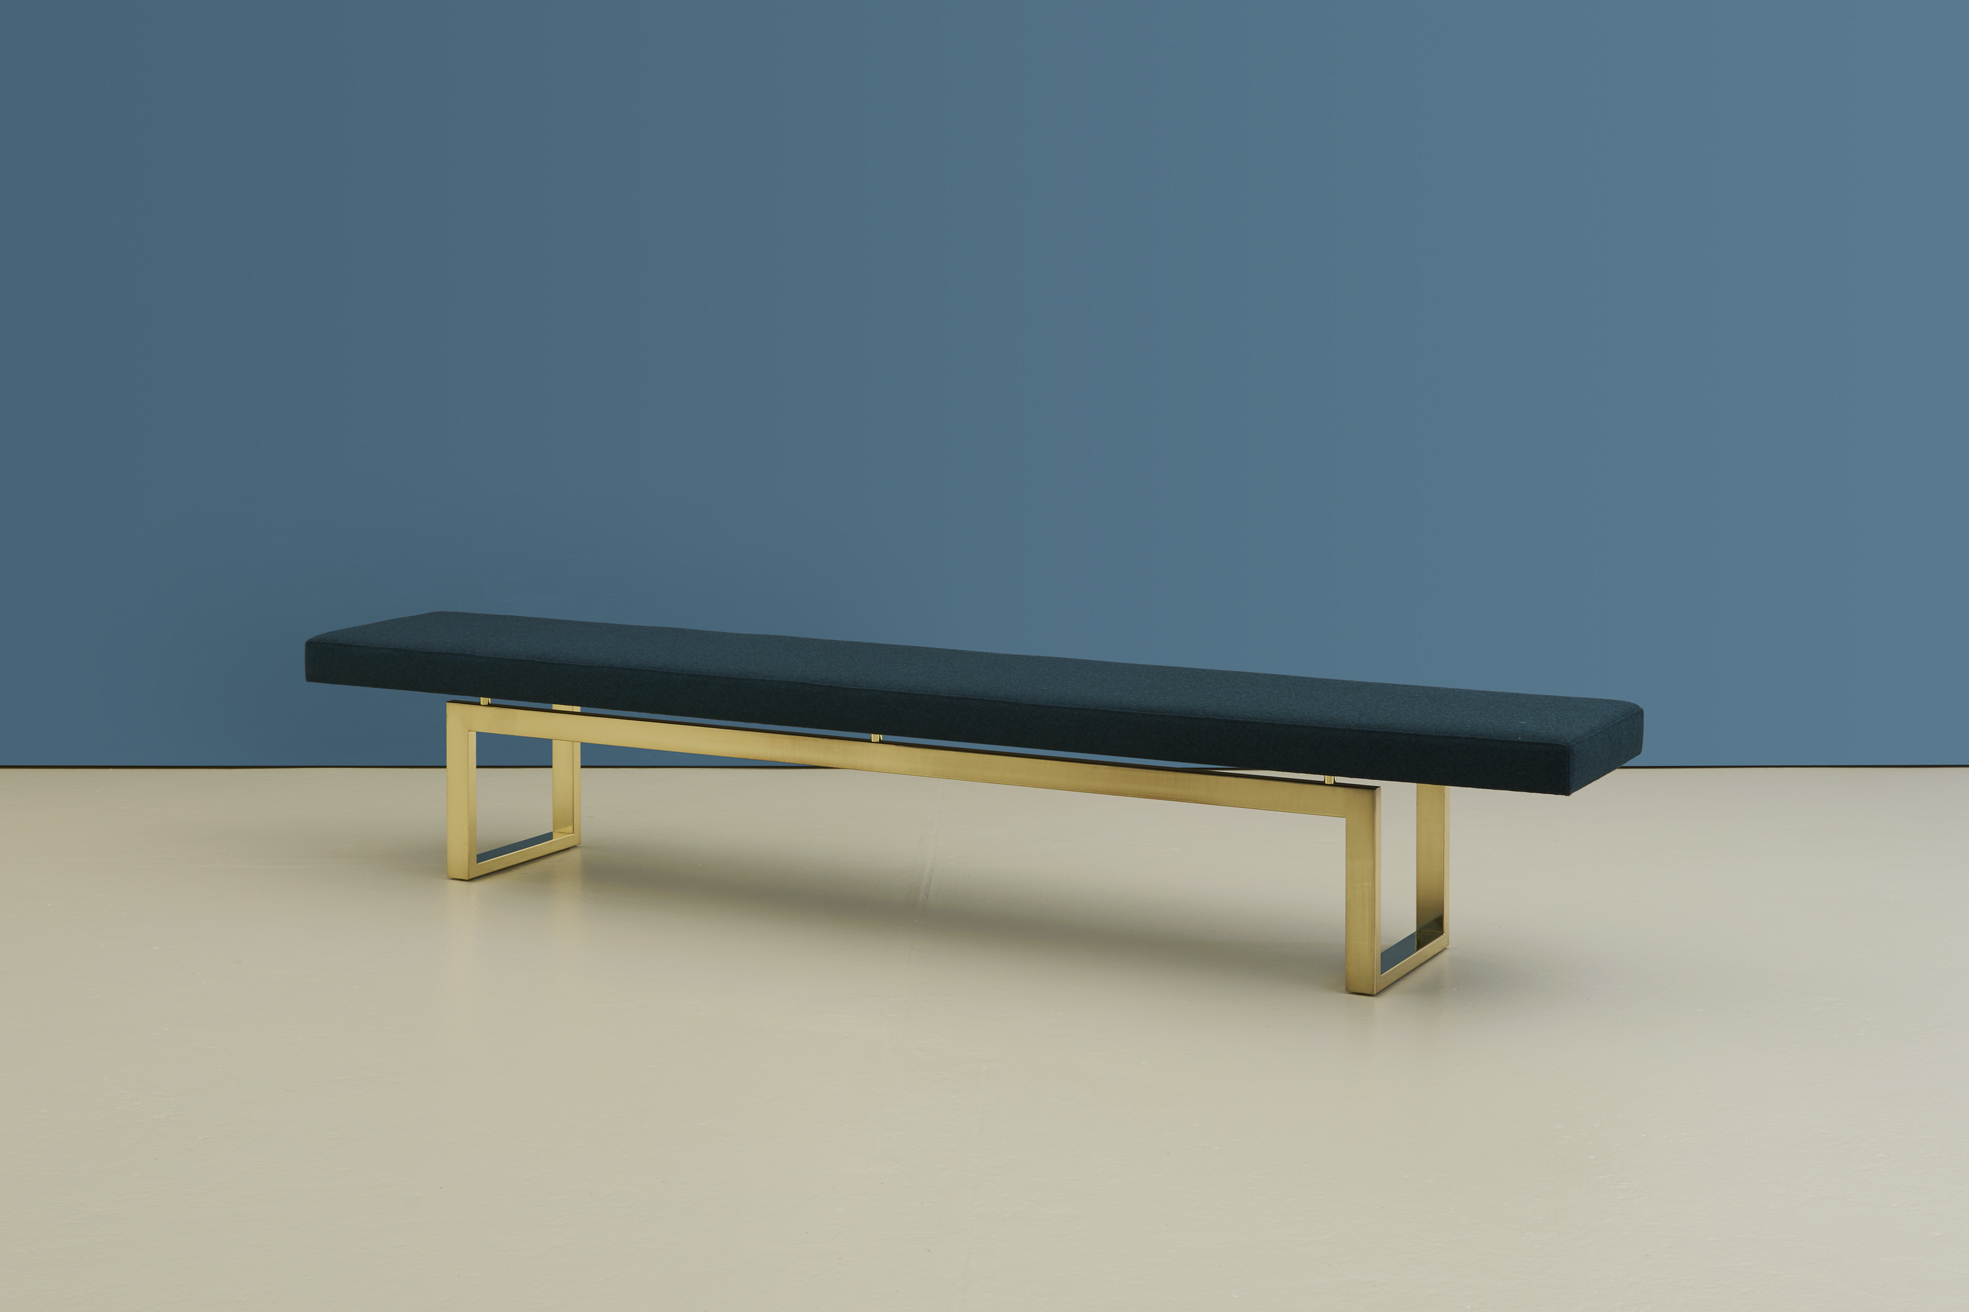 hm106c bench with polished brass base (2) (low res).jpg